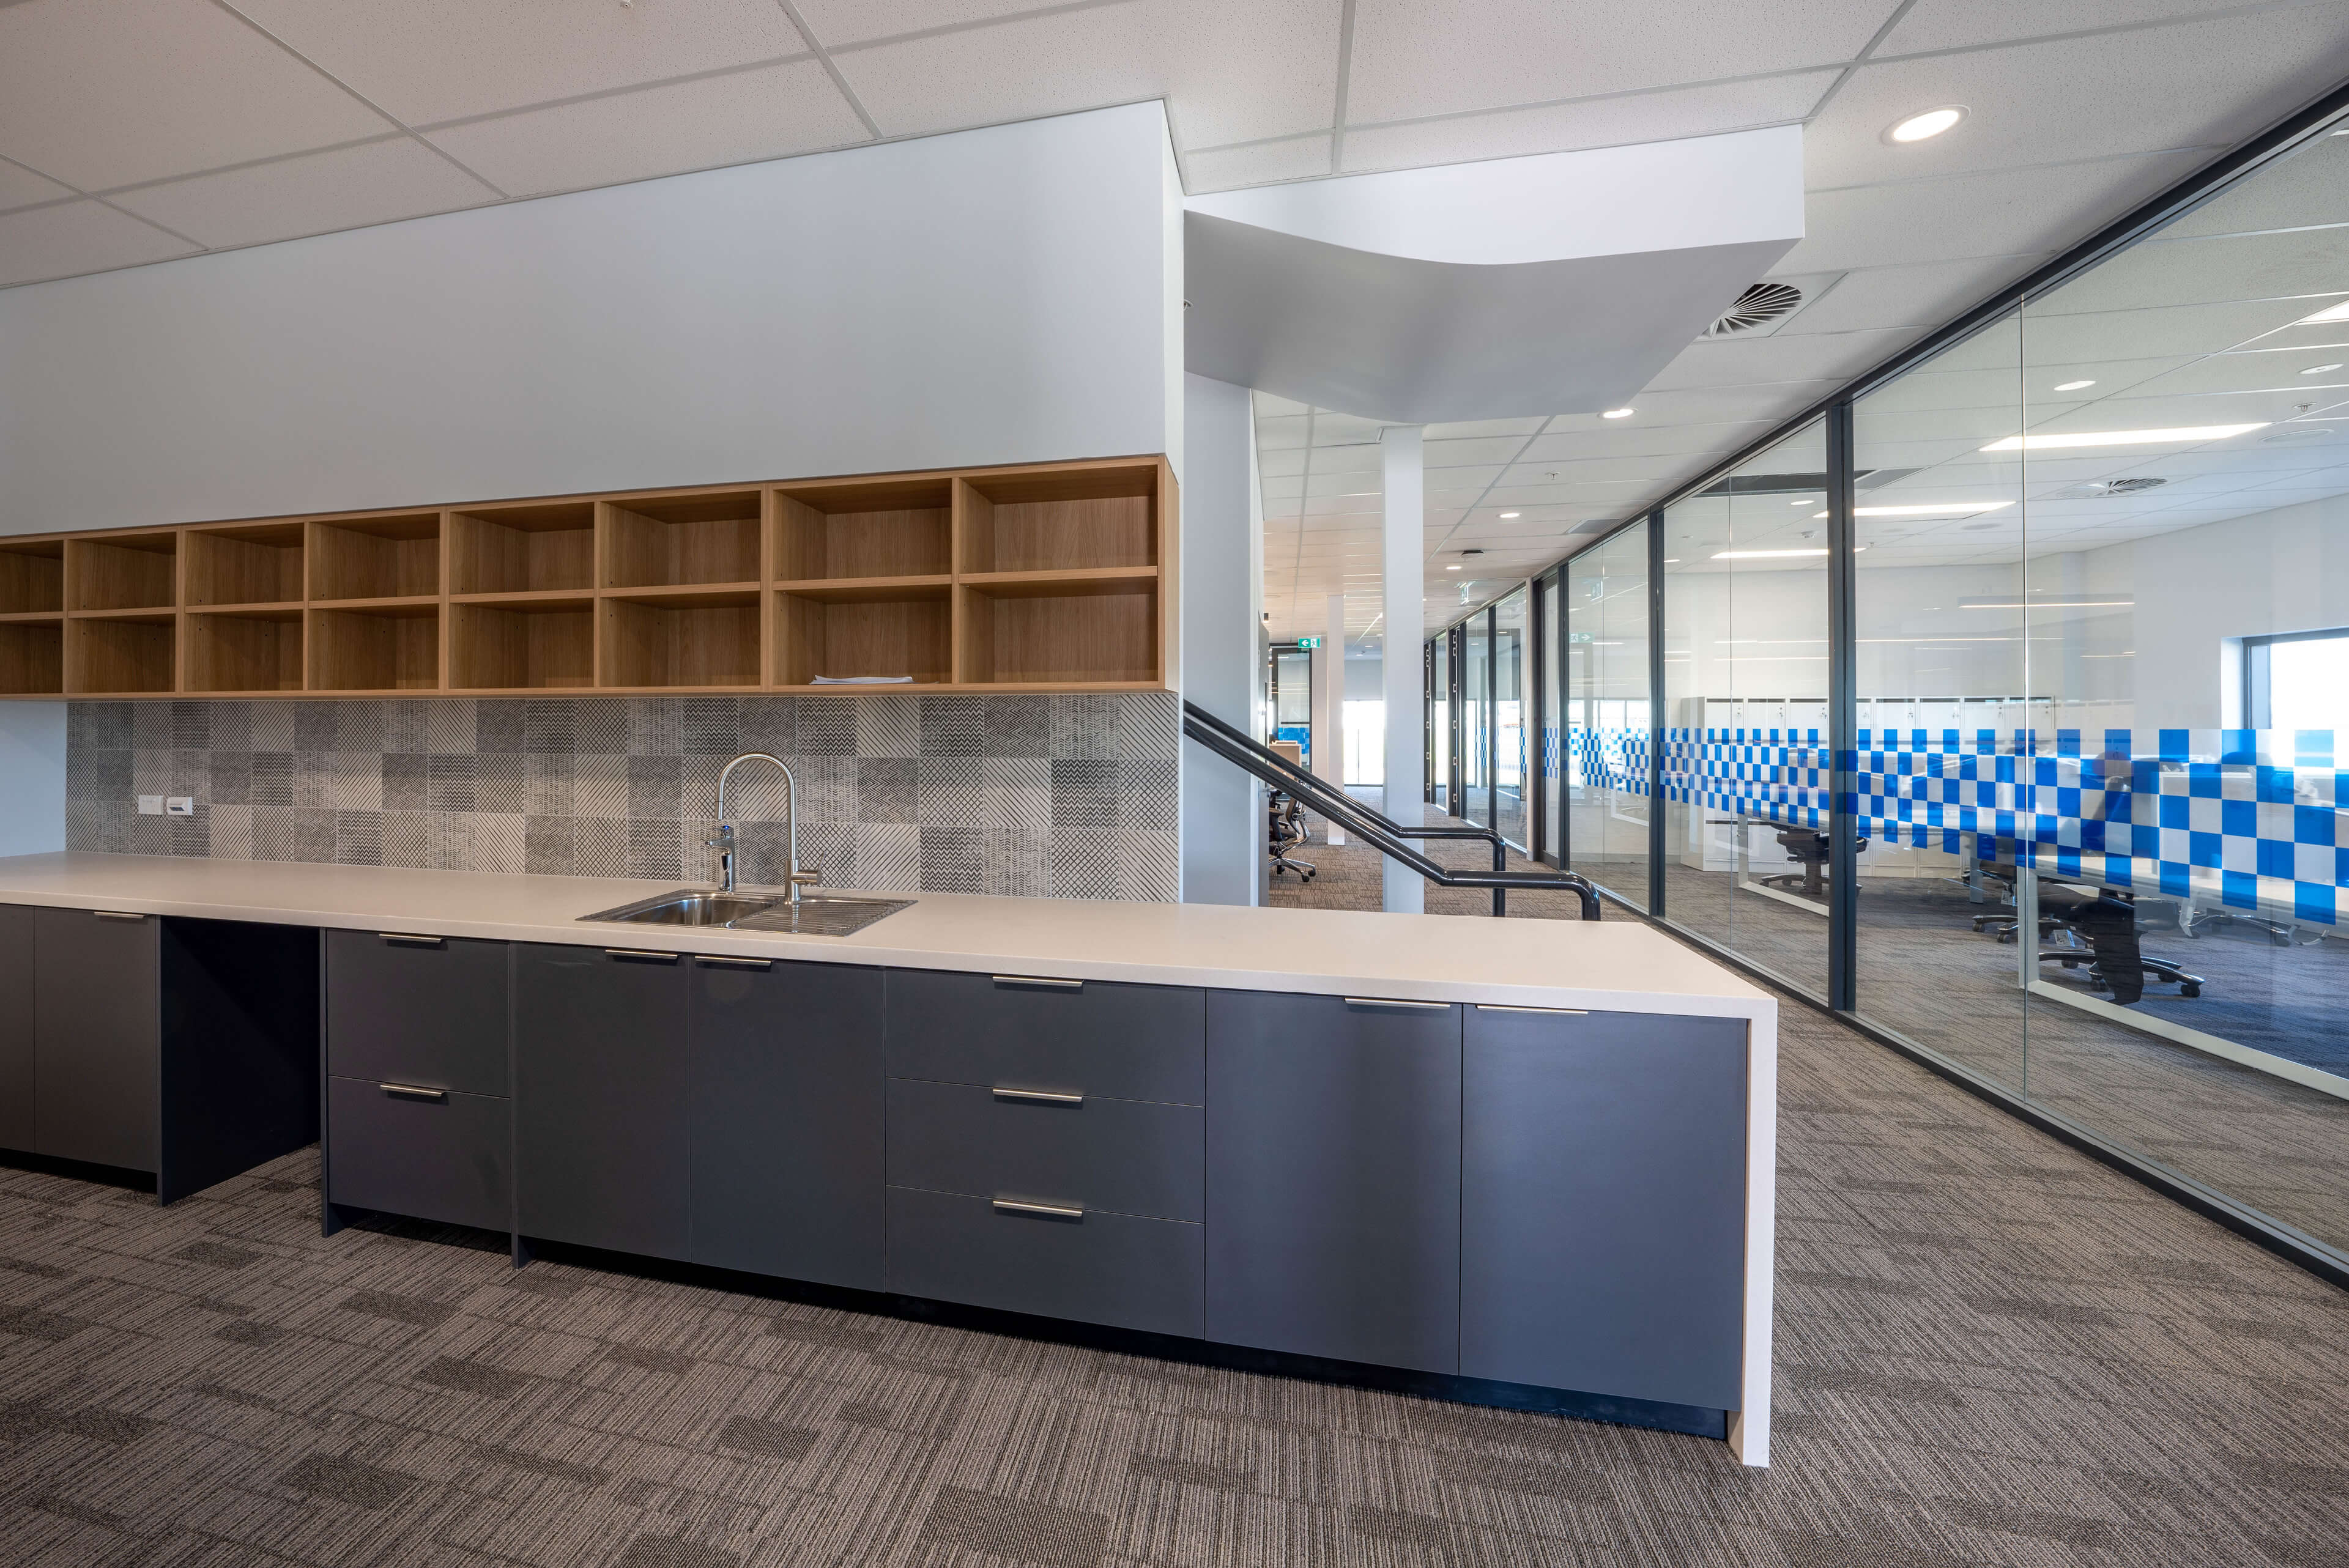 19 kitchen area of 3000sqm office space at polair facility bankstown taylor construction refurbishment and live environments